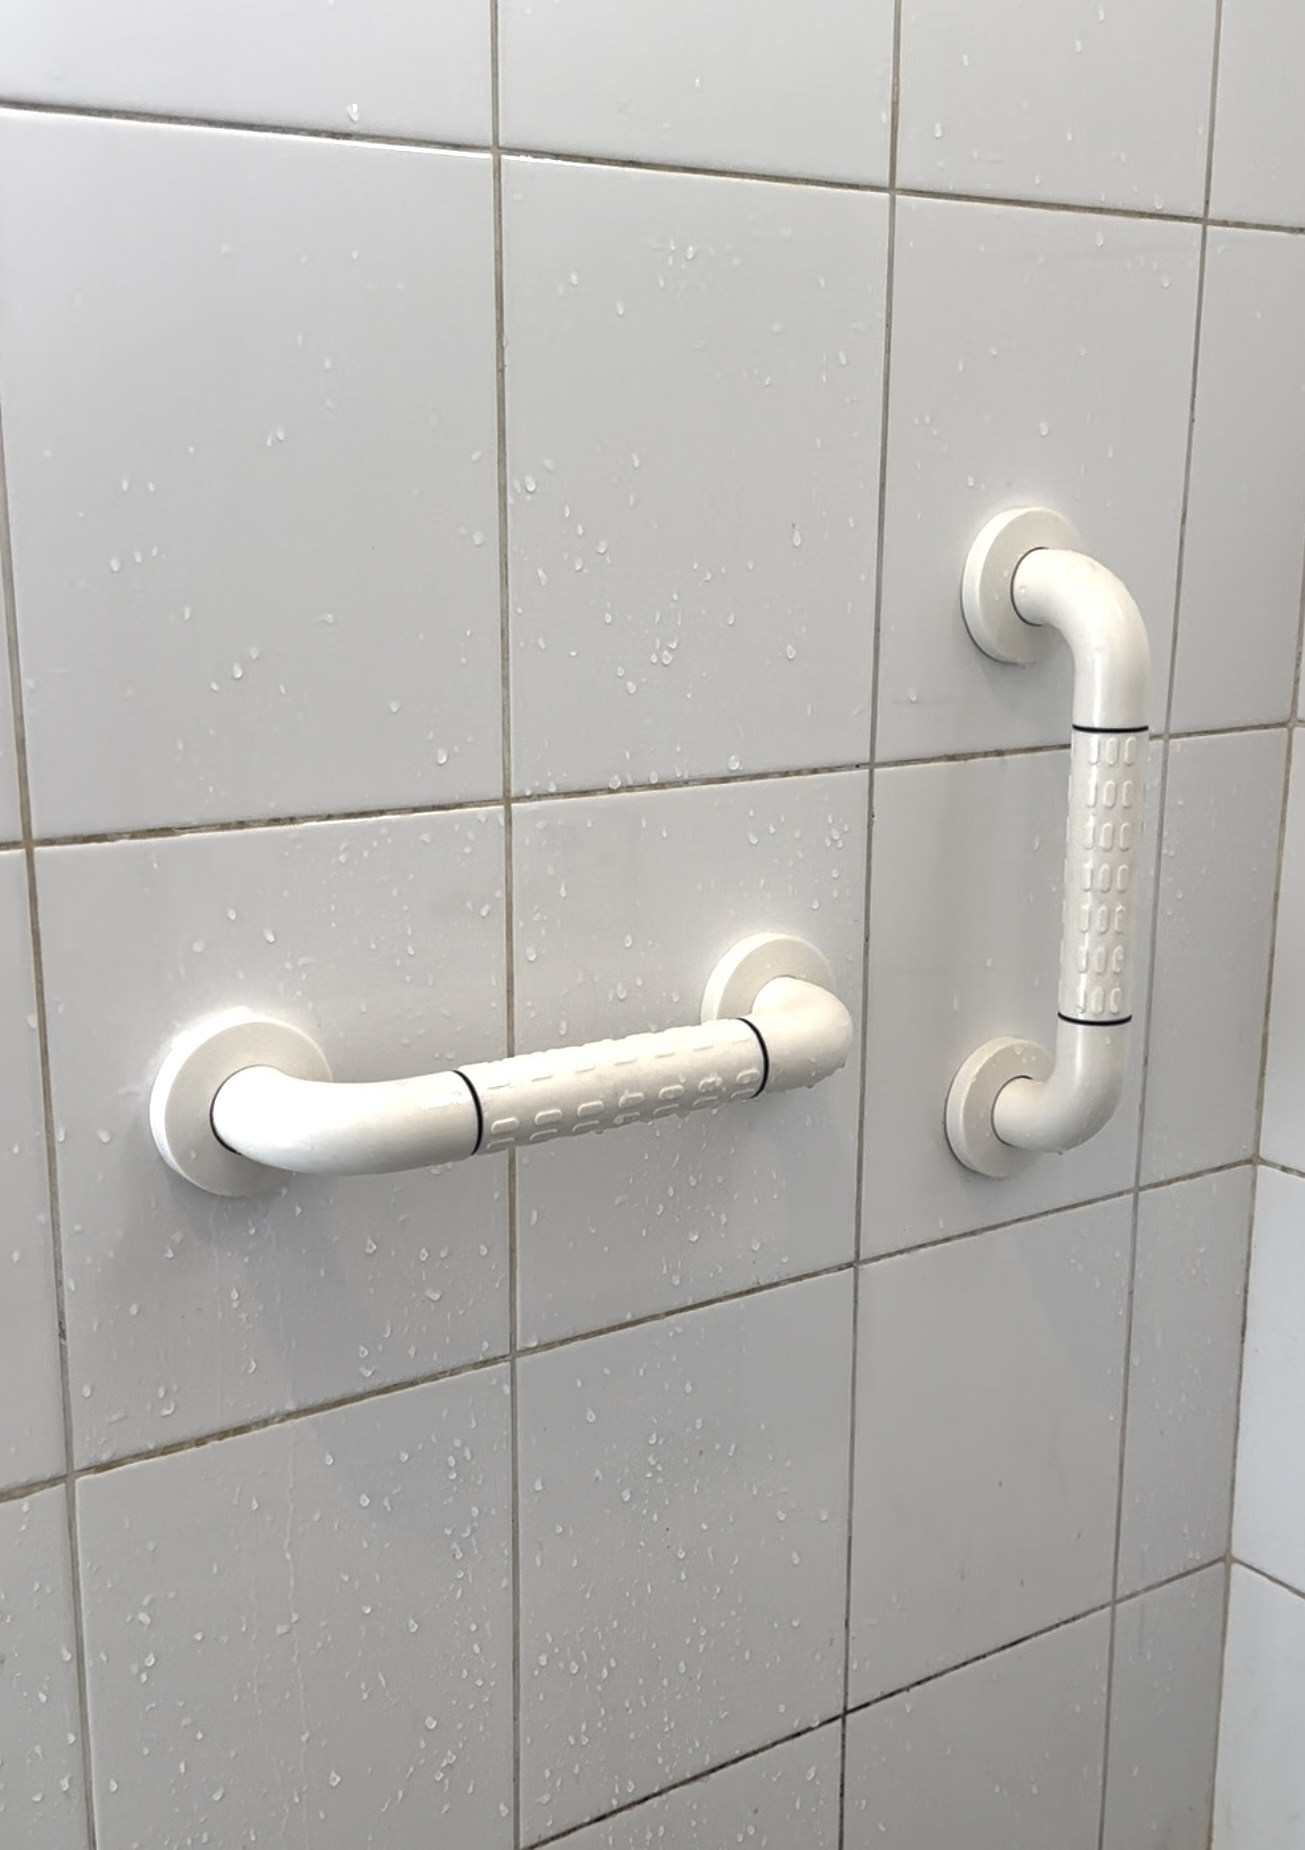 image of two nylon grab bars we installed in a hdb toilet